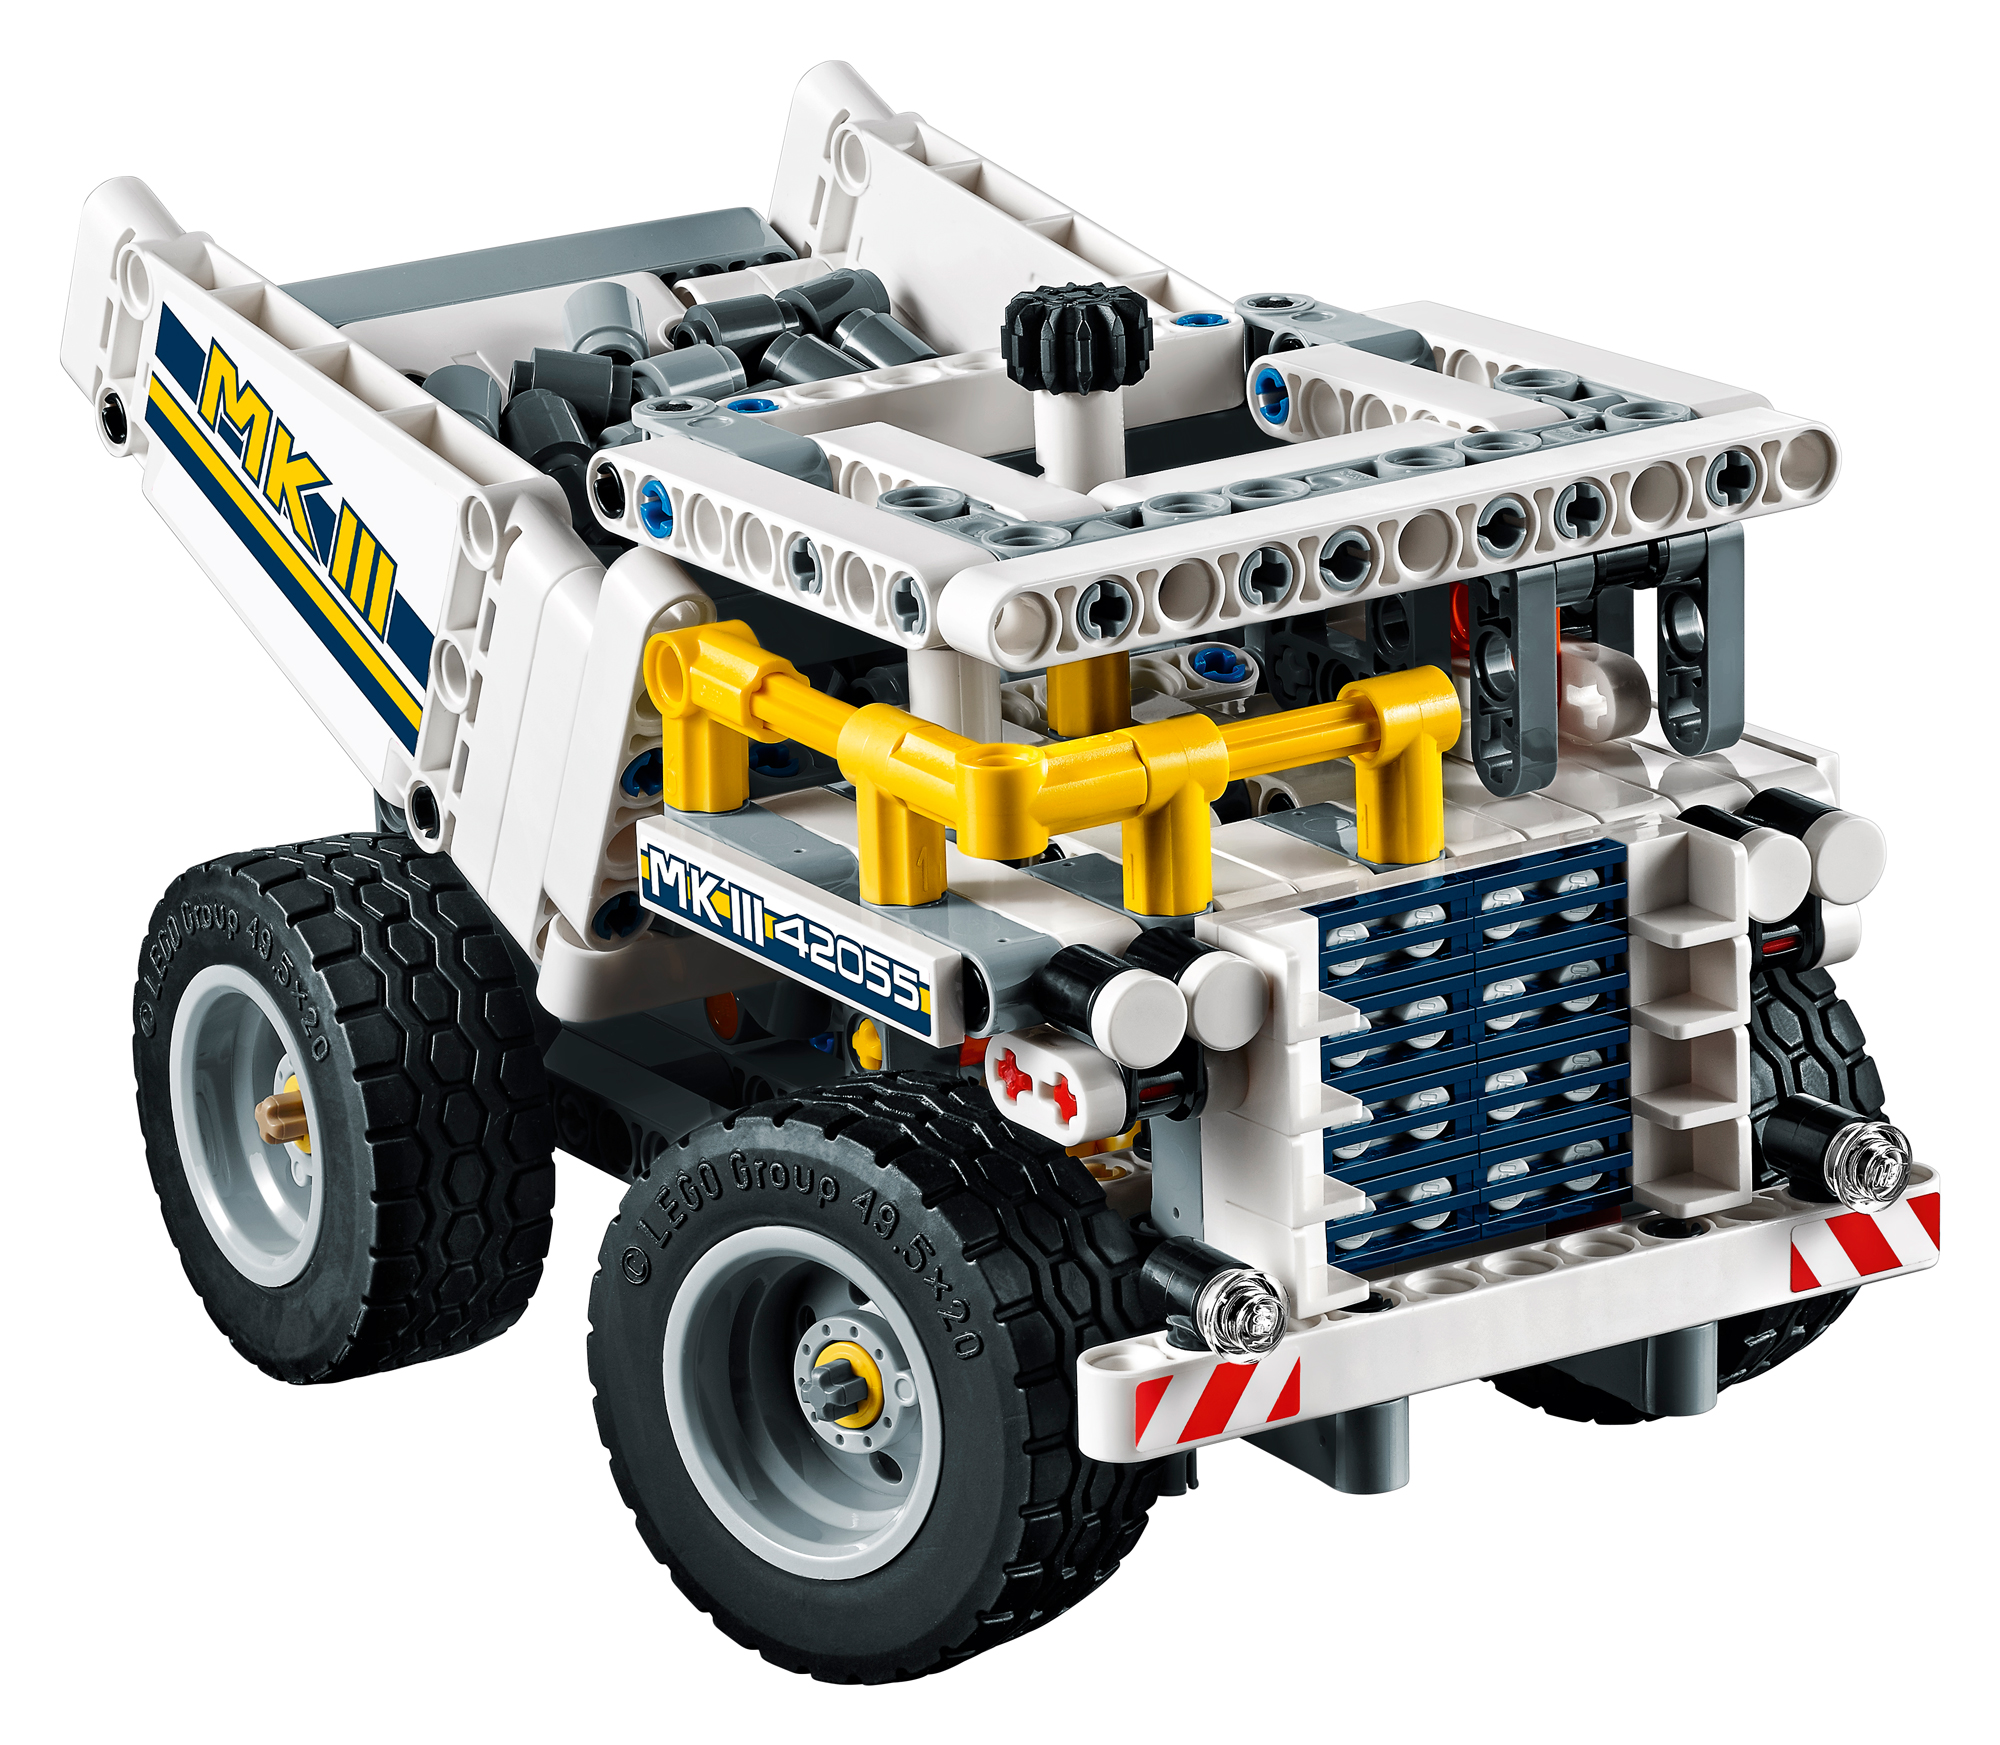 LEGO’s Largest Technic Set Can Dig A Moat Around Your Home